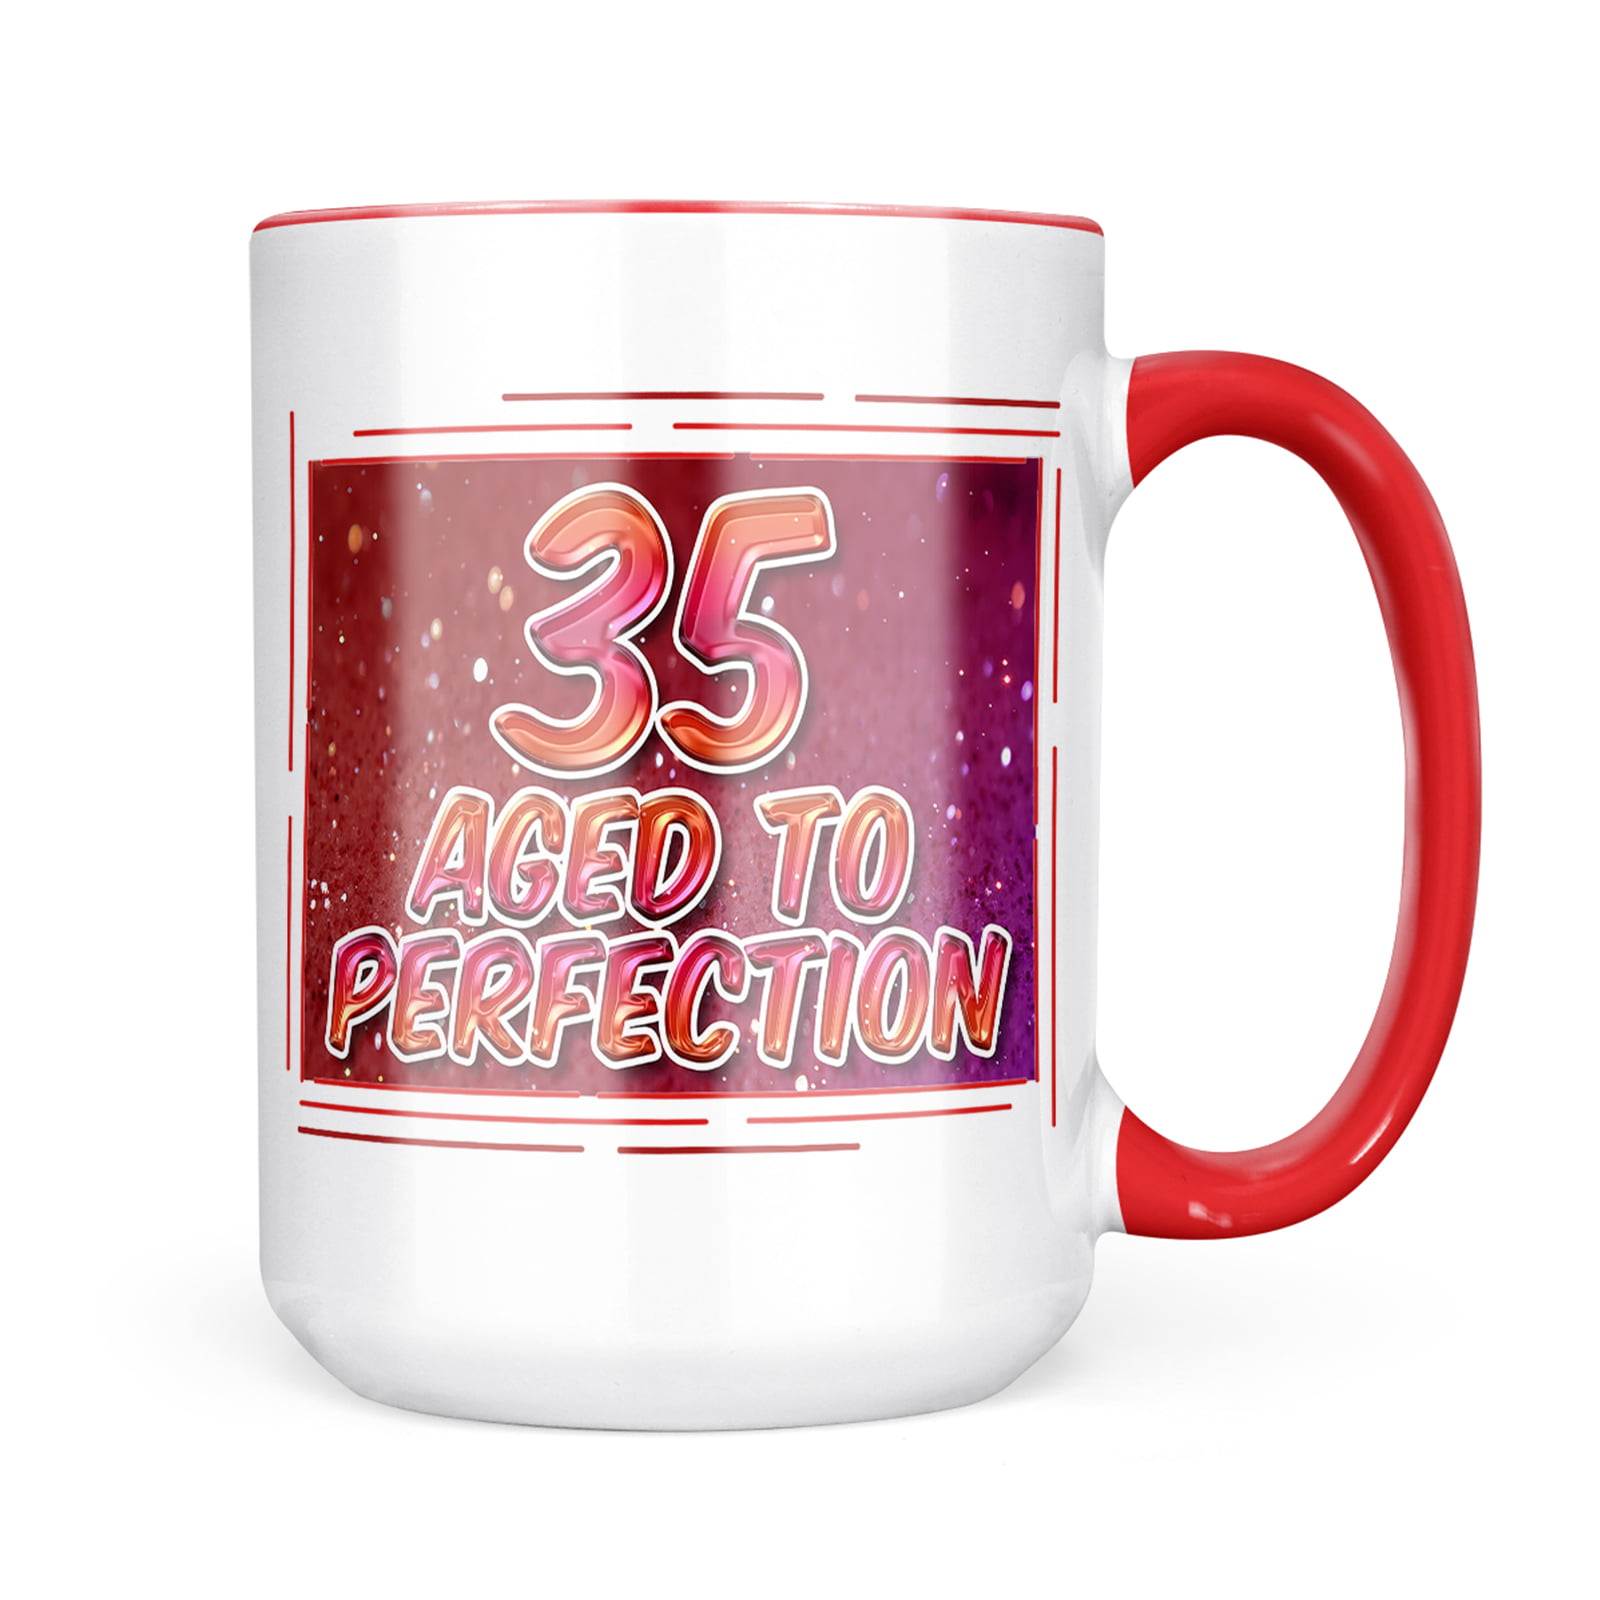 HAPPY BIRTHDAY Mug Gift Idea AWESOME SINCE 1970 Celebrating Special Year of Birth Born in 1970 Great Present for Male Female Friend Family Office Coworker 11oz Ceramic Coffee Tea Cup Digibuddha DM0751